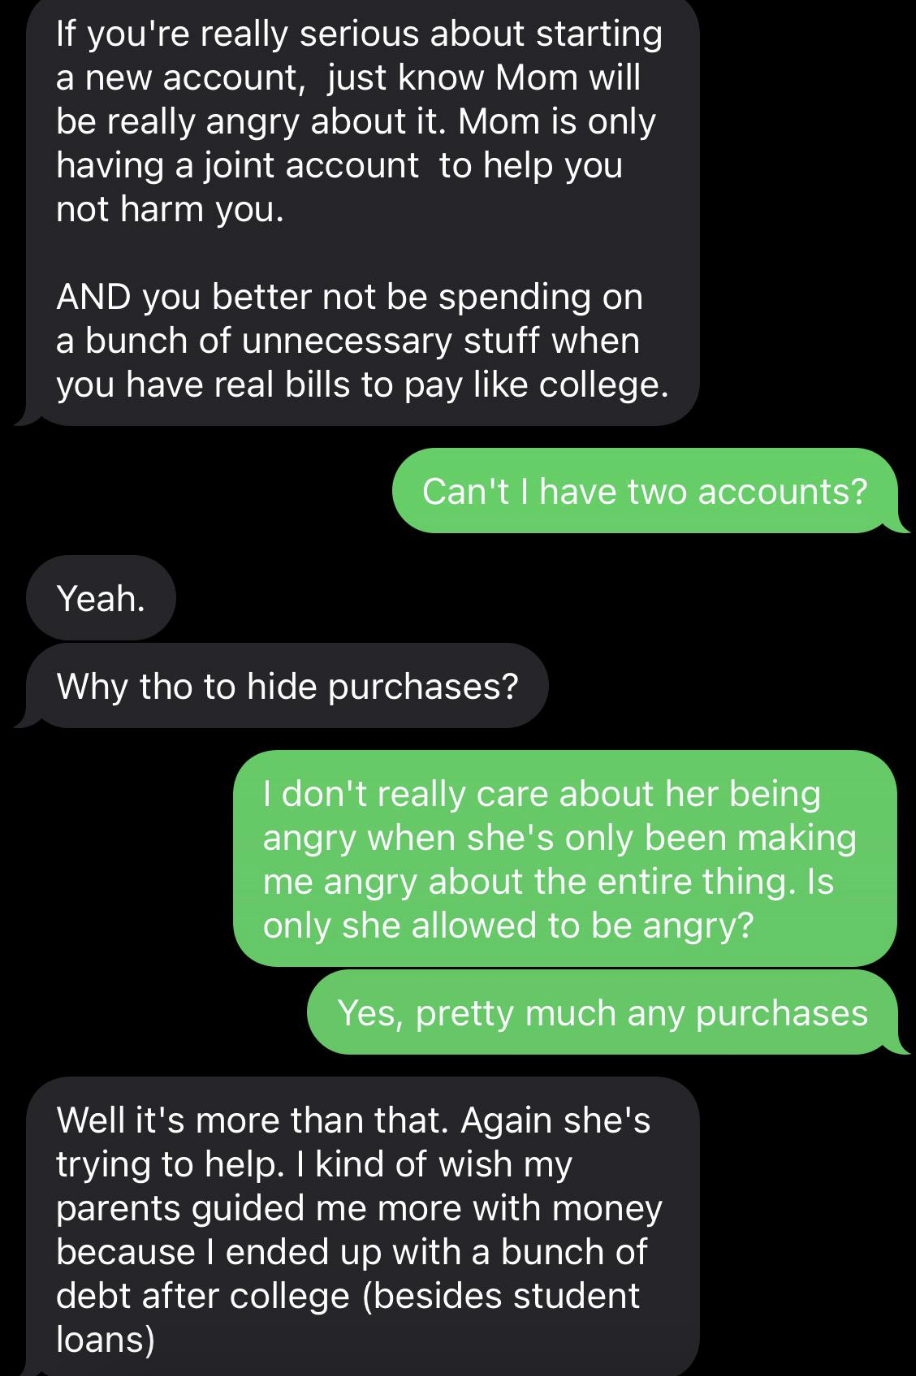 A father tells their child that their mother will be angry if the child gets a separate bank account and asks why they want to hide their purchases